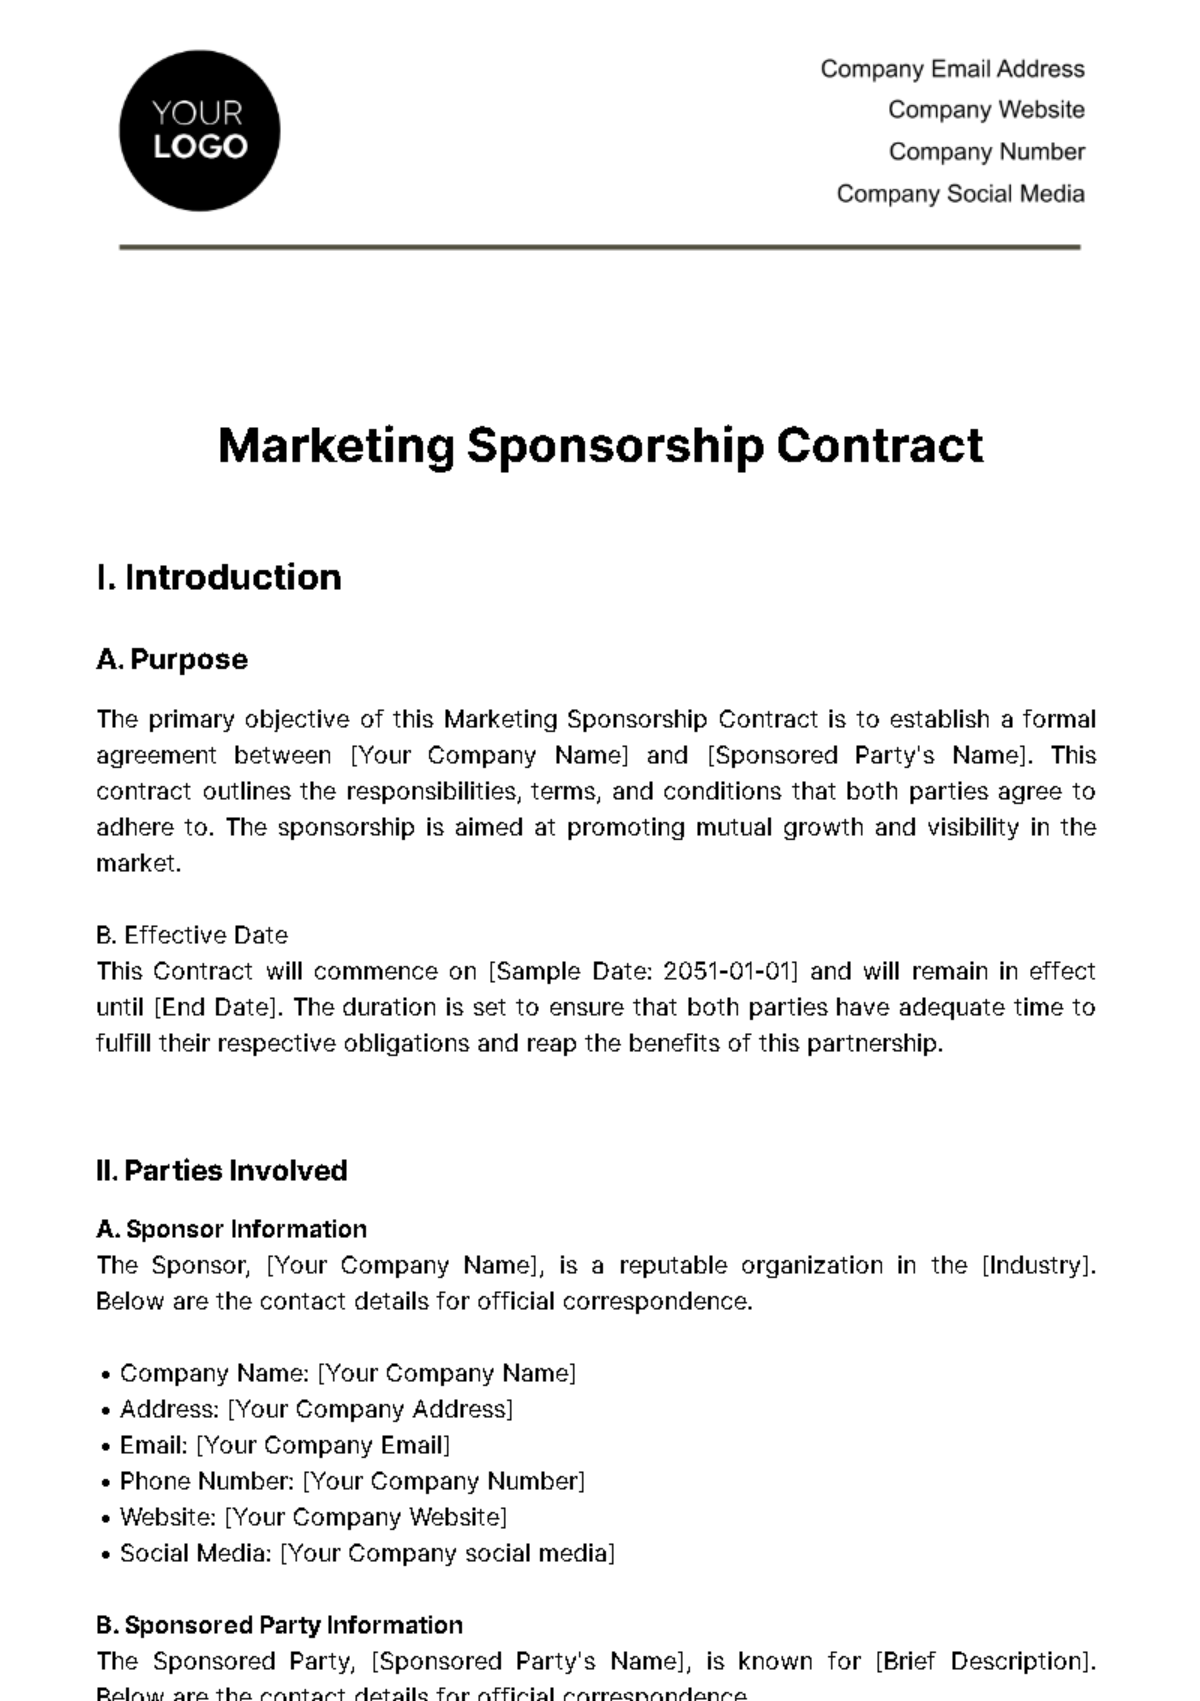 Free Marketing Sponsorship Contract Template